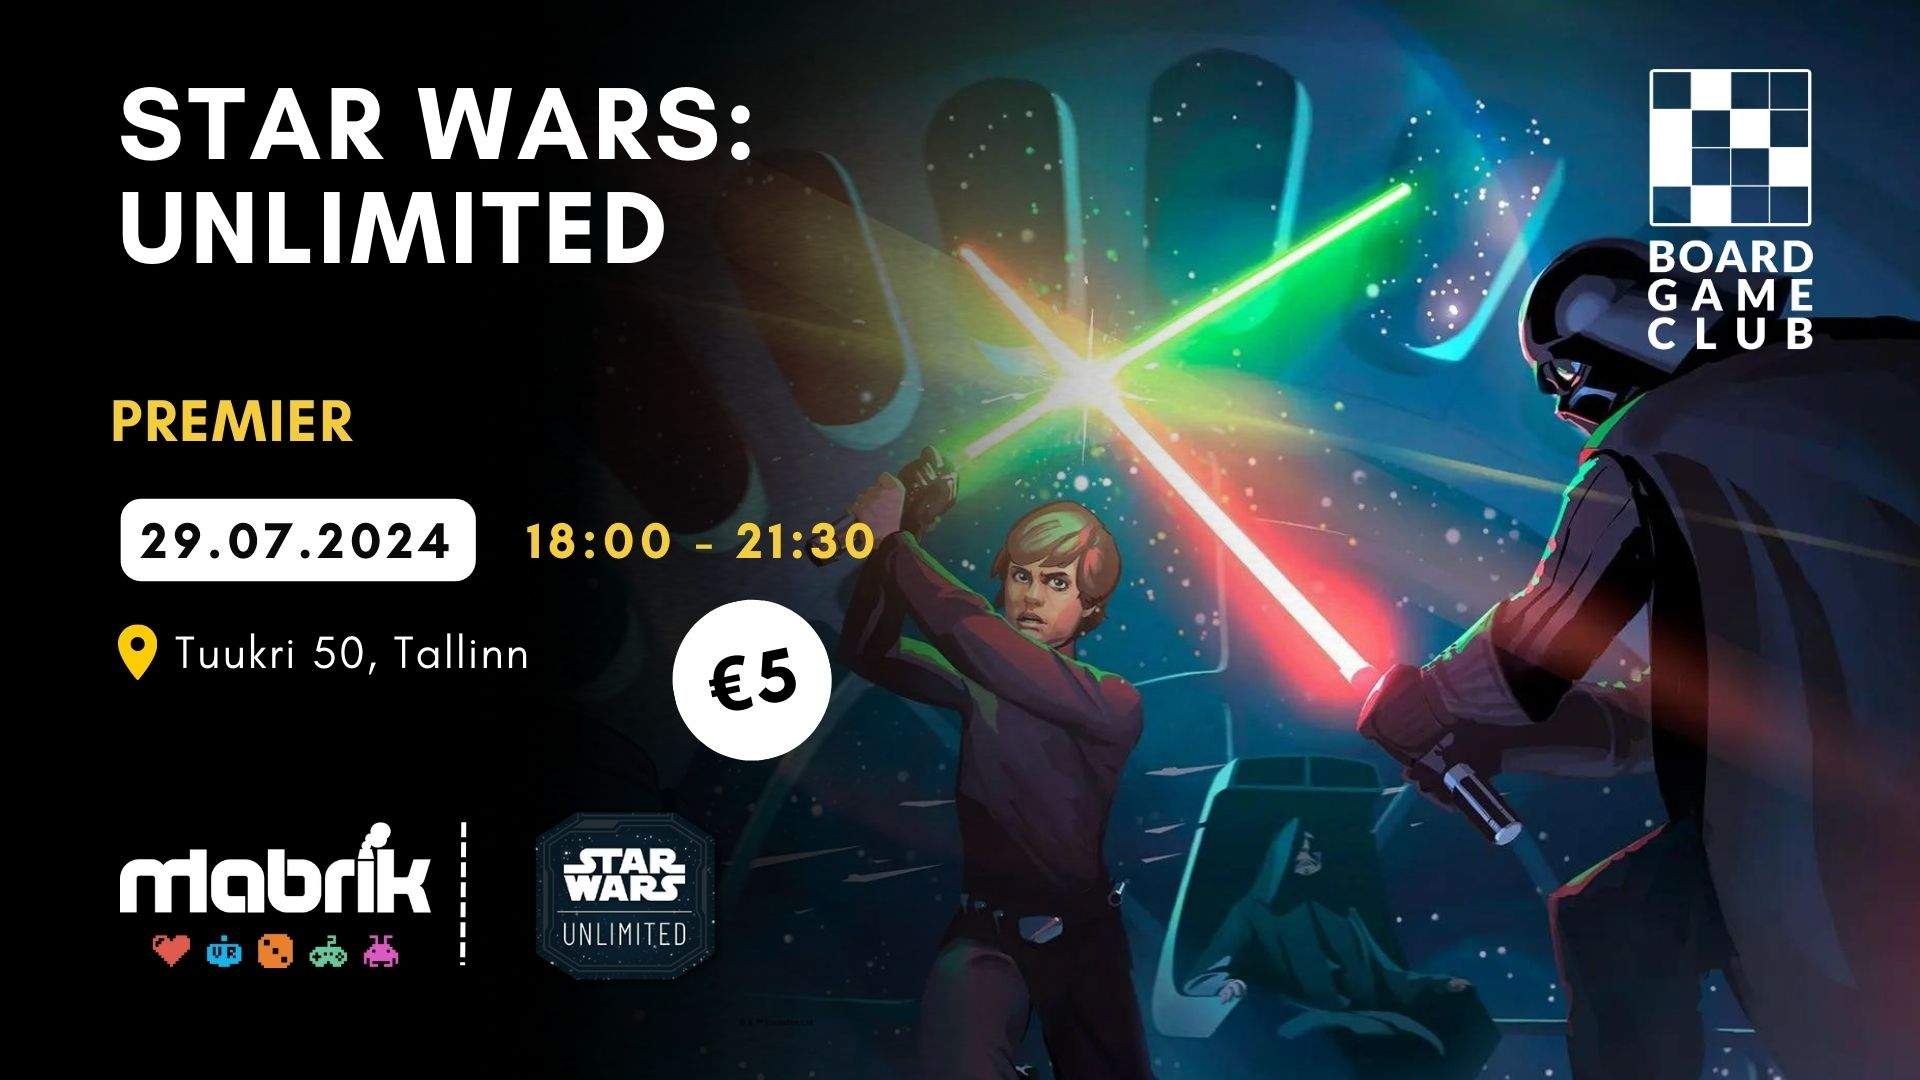 Events - 29.07.2024 - Star Wars: Unlimited - Premier